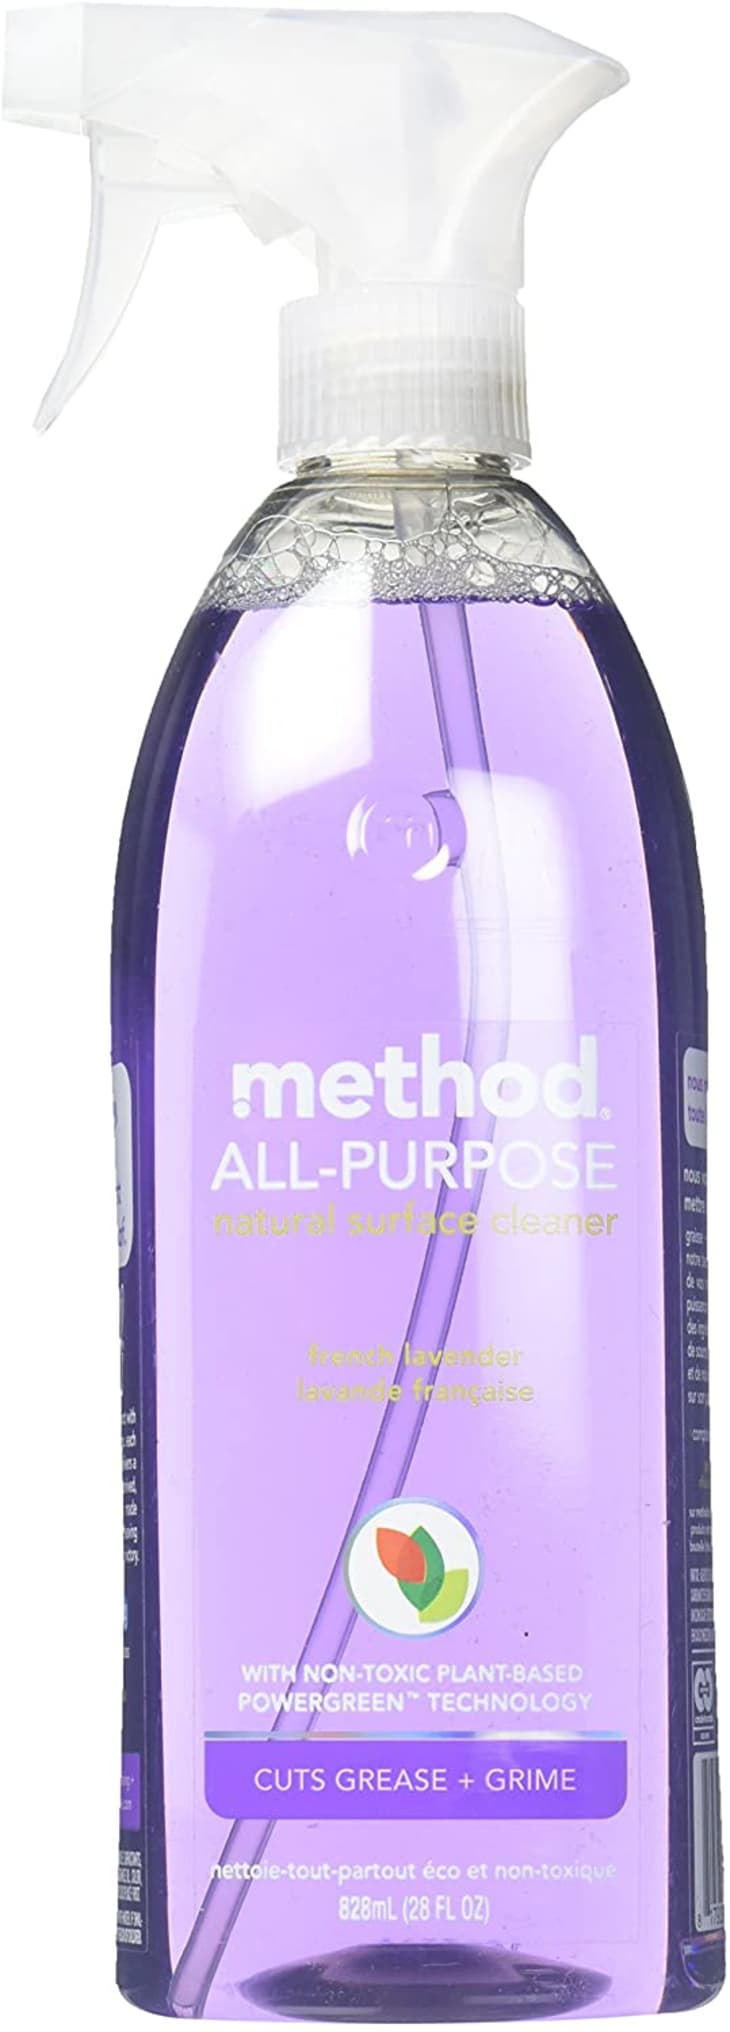 Product Image: Method All-Purpose Cleaner, French Lavender